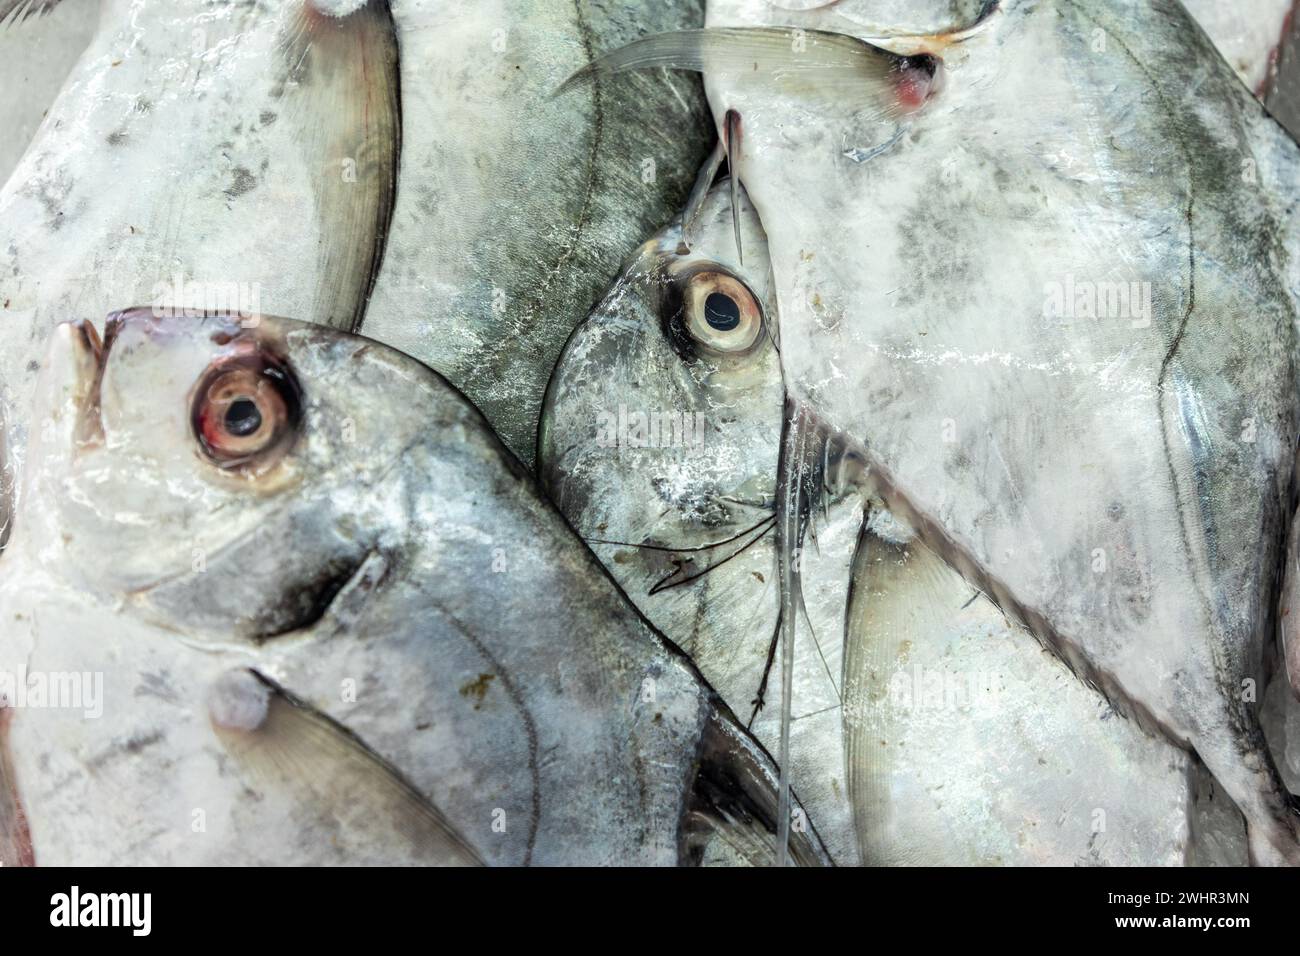 African pompano (Alectis ciliaris), pennant-fish, threadfin trevally, fresh caught fishes for sale on fishmarket Stock Photo